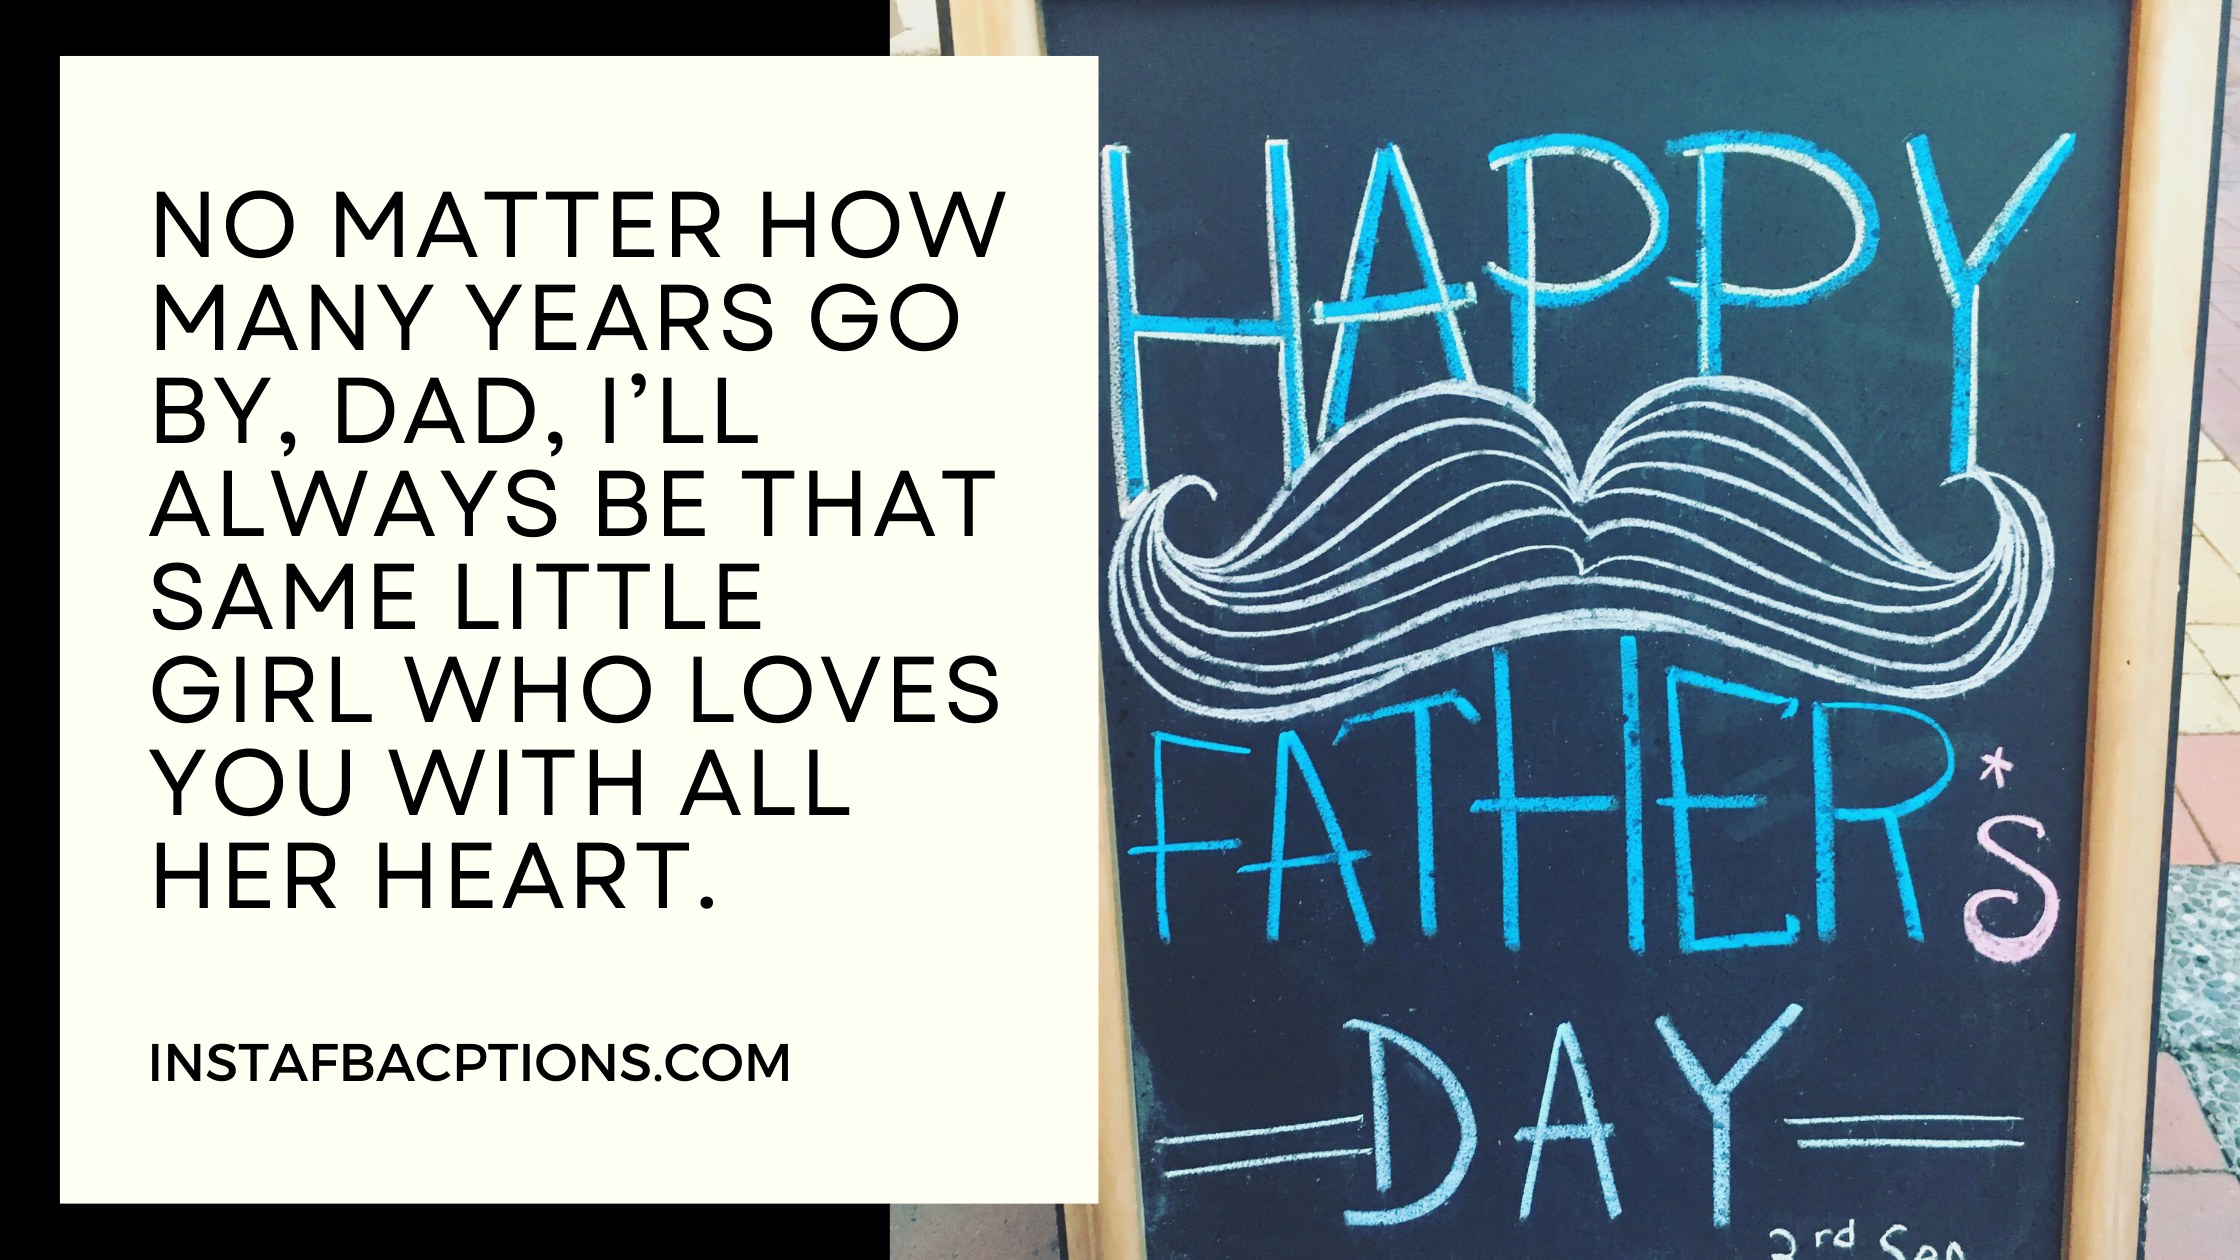 Happy Fathers Day Captions  - Happy Fathers Day Captions 1 - 78 Father&#8217;s Day Instagram Captions, Quotes and Wishes for 2022